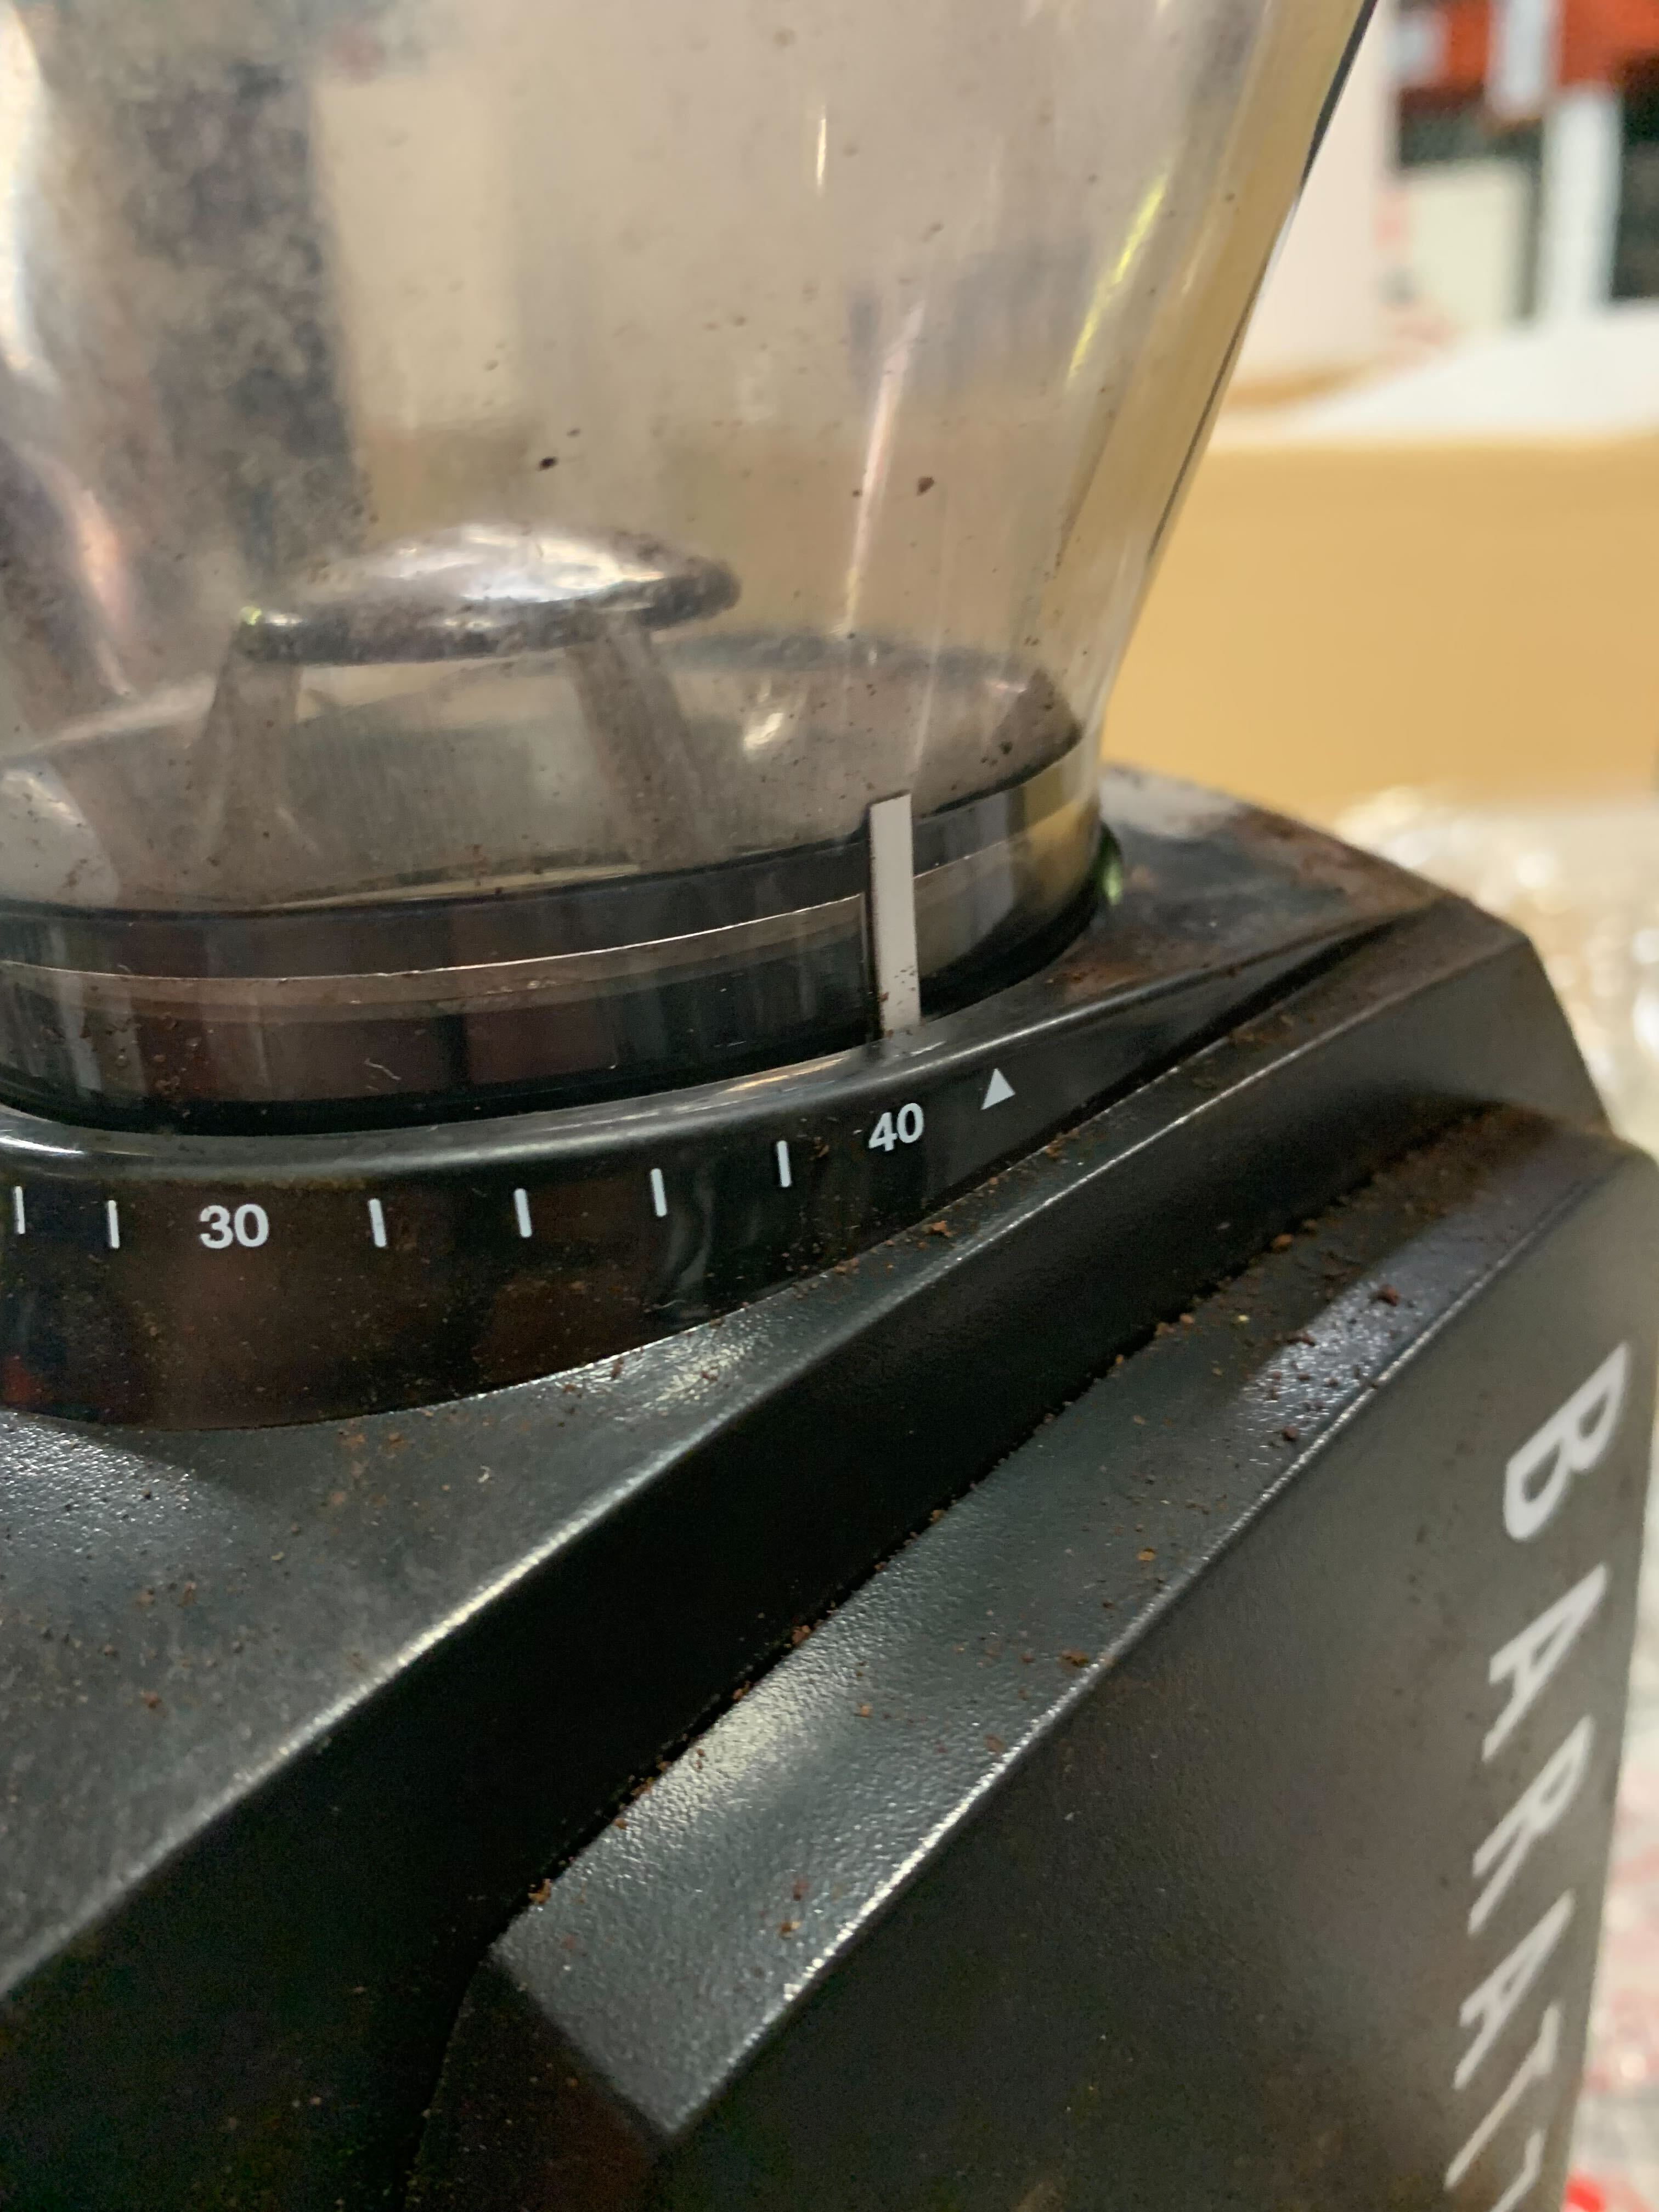 How To Clean A Coffee grinder and its burrs (+ how NOT to do it)